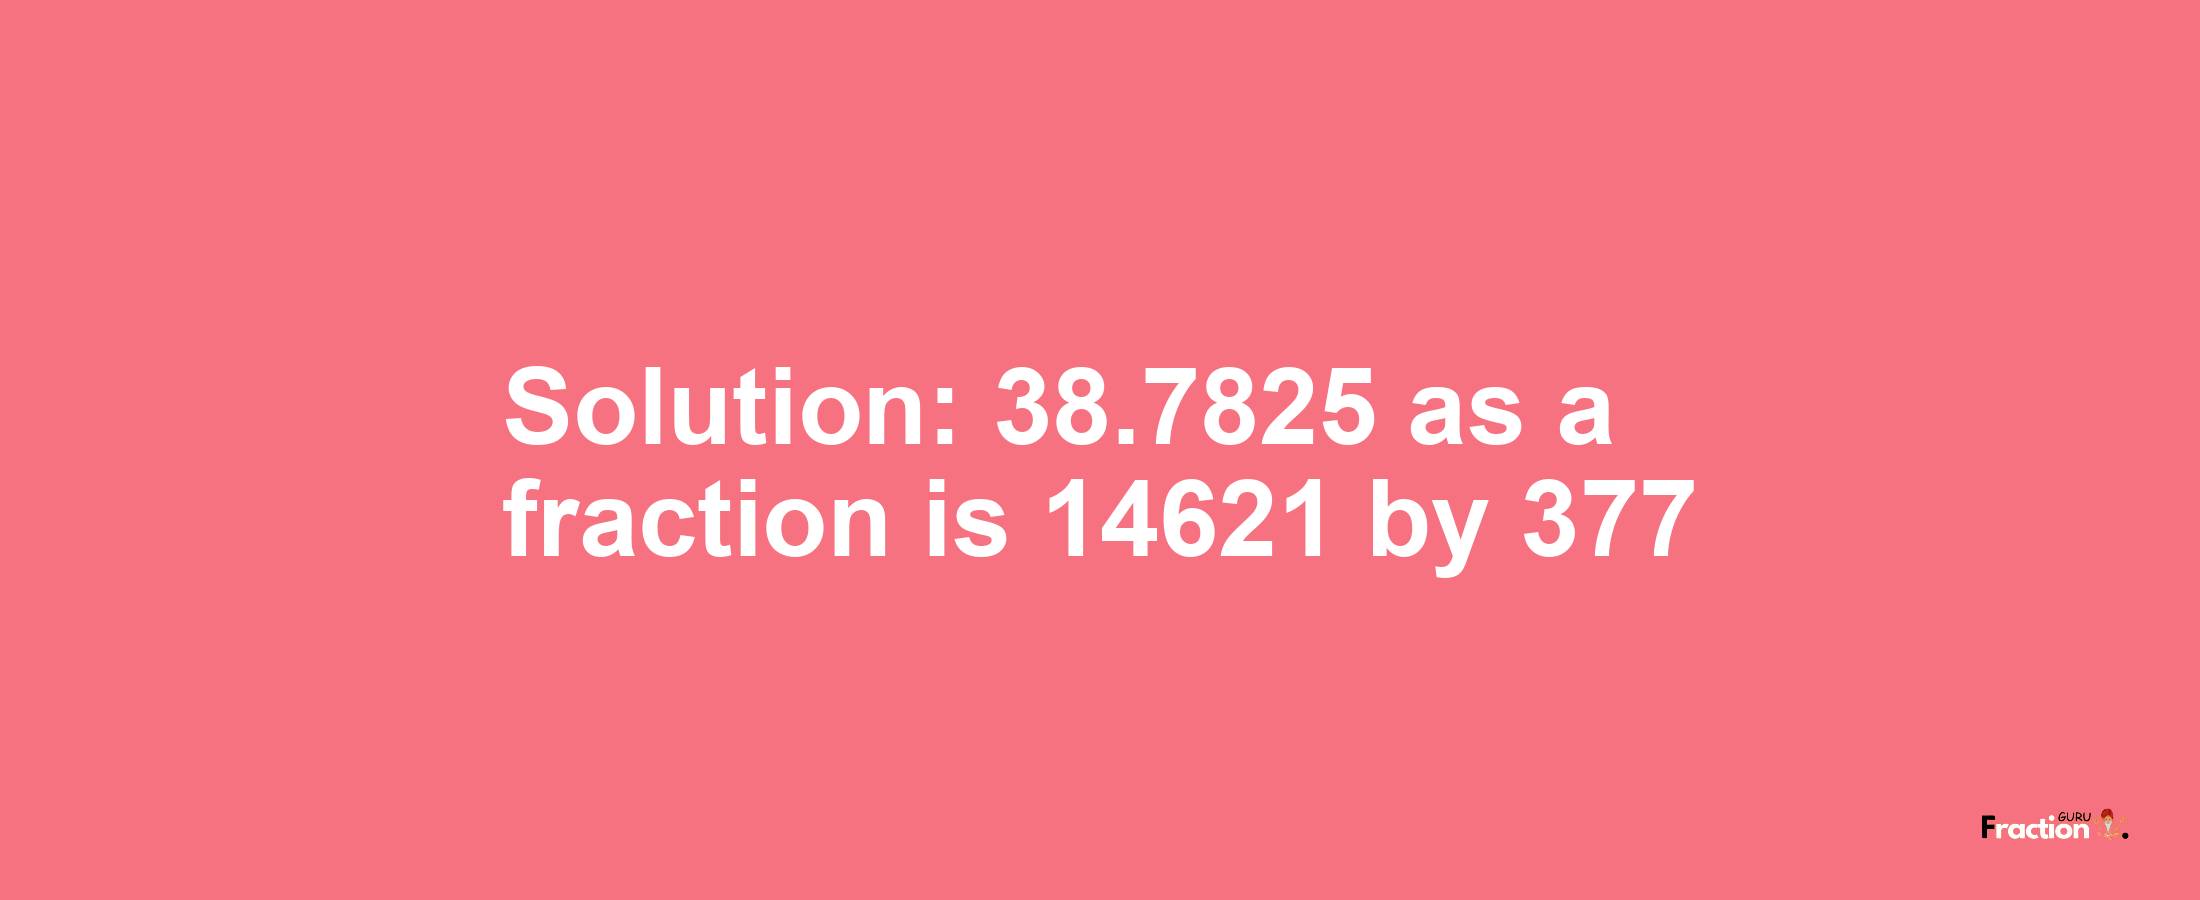 Solution:38.7825 as a fraction is 14621/377